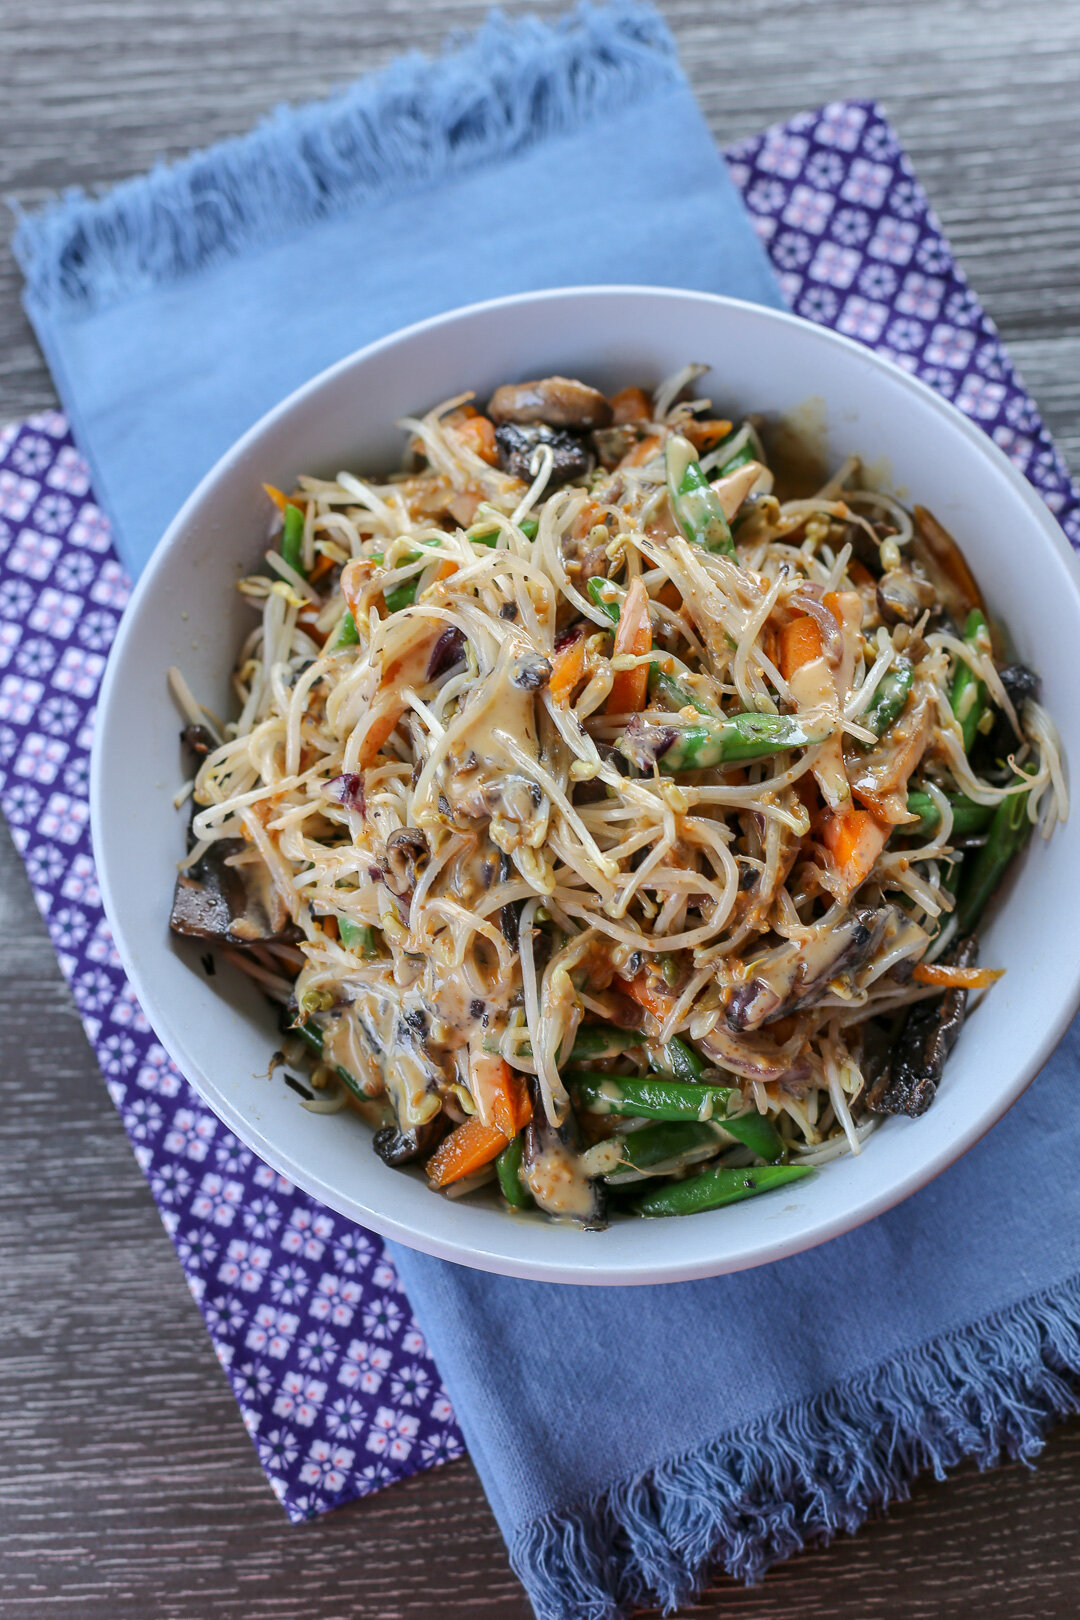 Bean Sprouts and Vegetables in Roasted Sesame Dressing